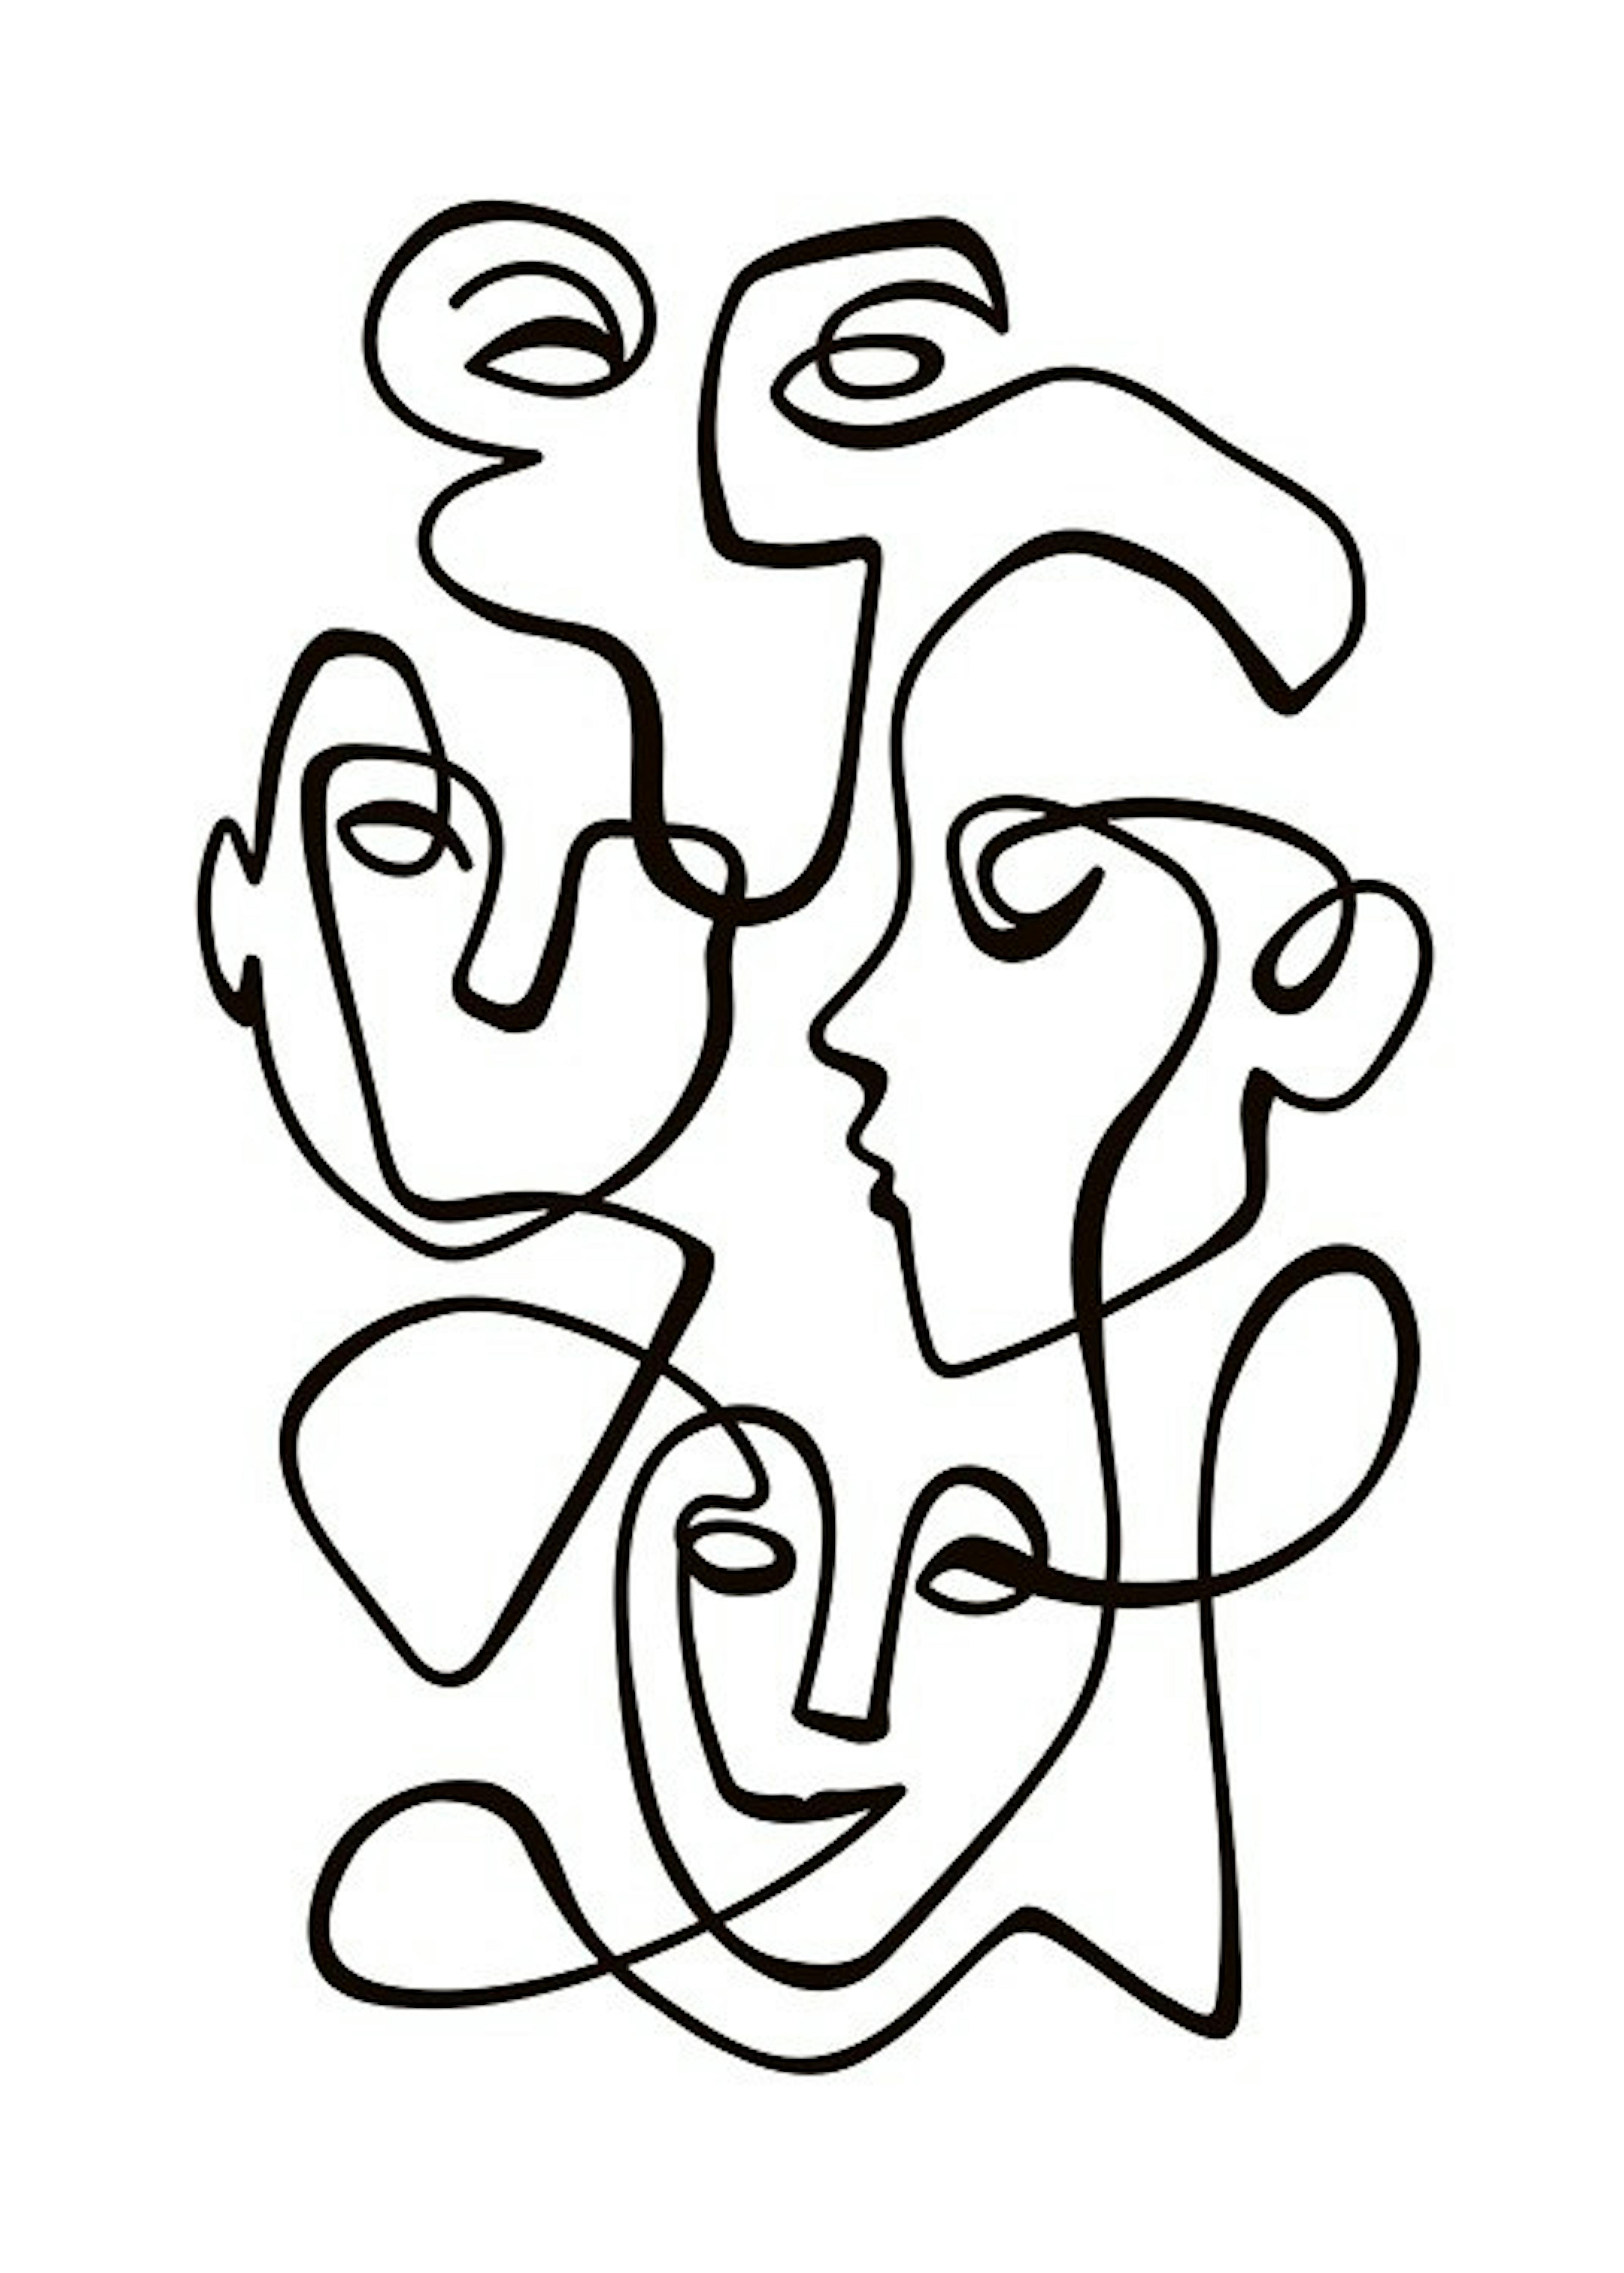 Abstract Line People No2 Poster 0